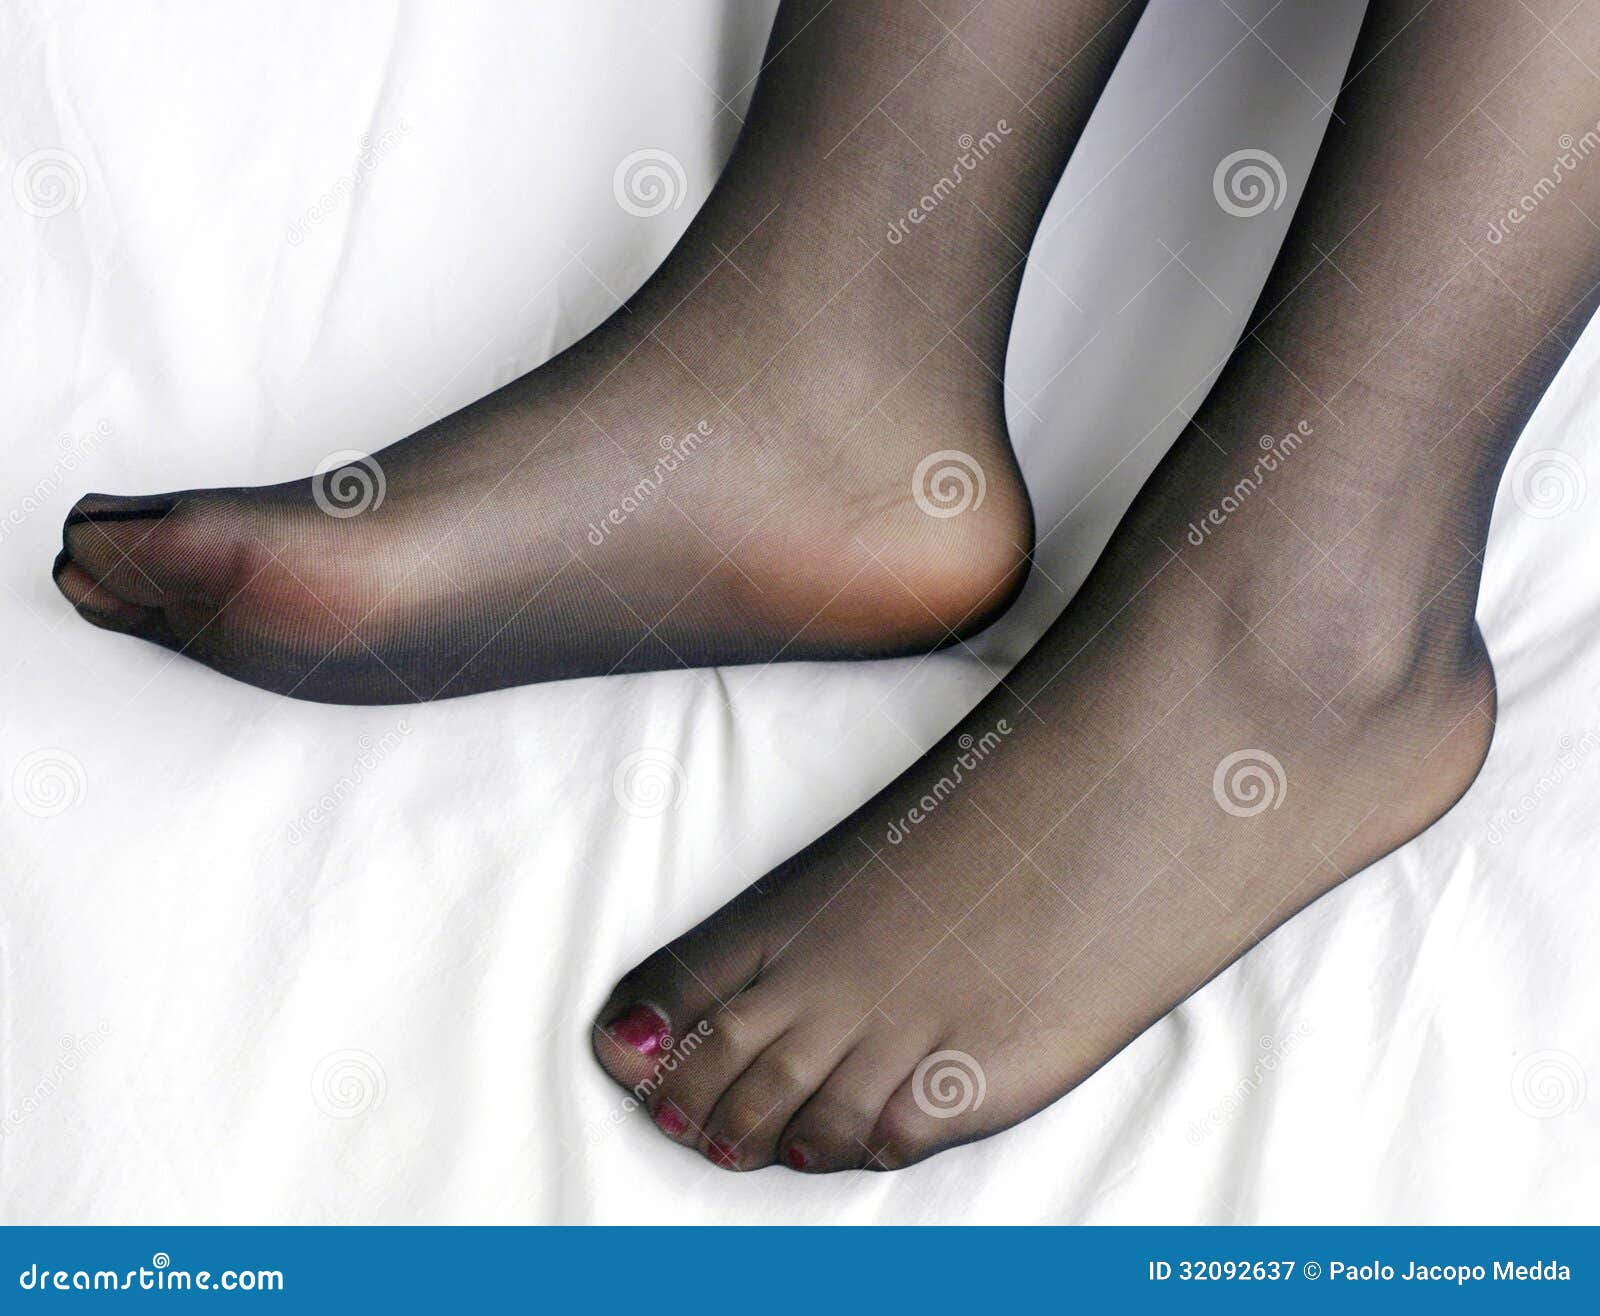 Painted Toes In Pantyhose sex anonser